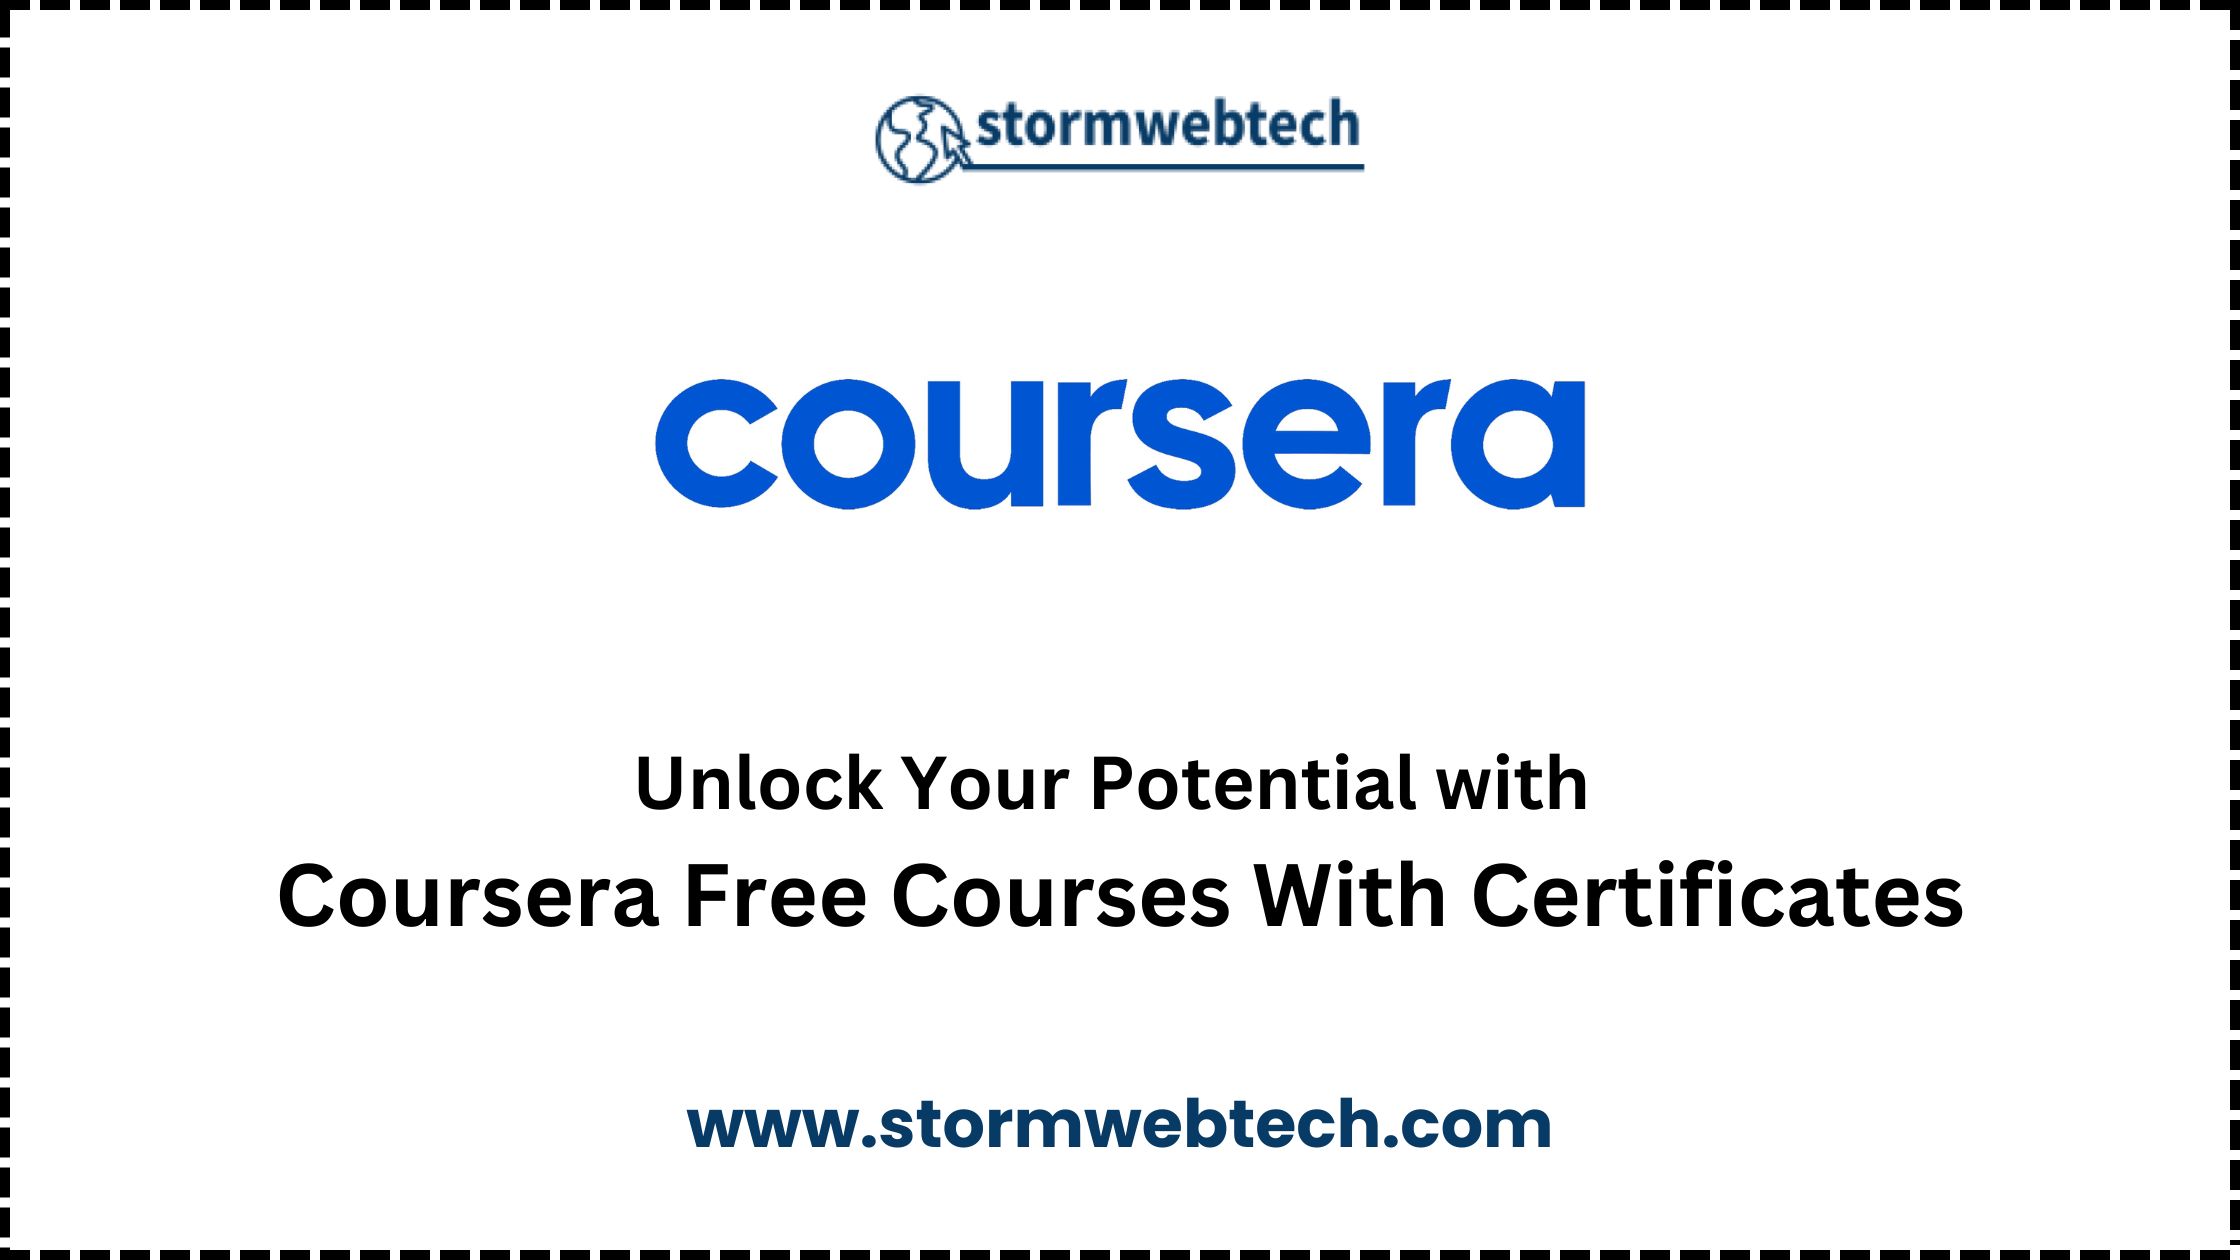 Unlocking New Skills : Coursera Free Courses With Certificates, Unlock Your Potential with Coursera Free Courses With Certificates